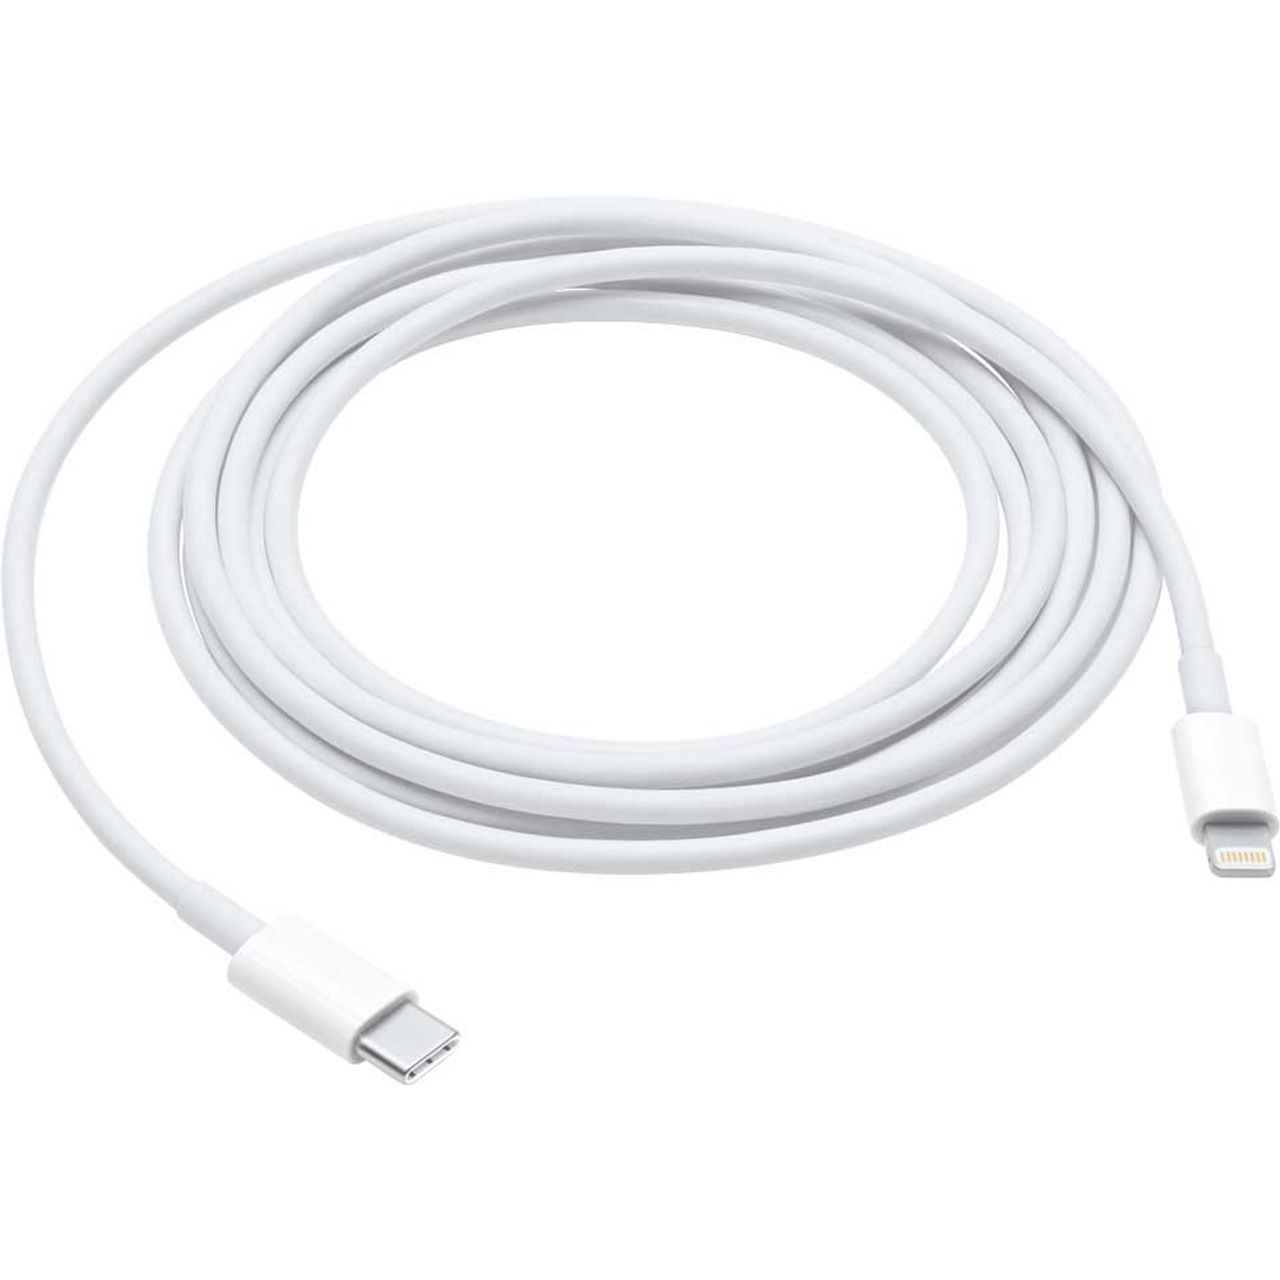 Apple USB-C to Lightning Cable (2 metres) Review